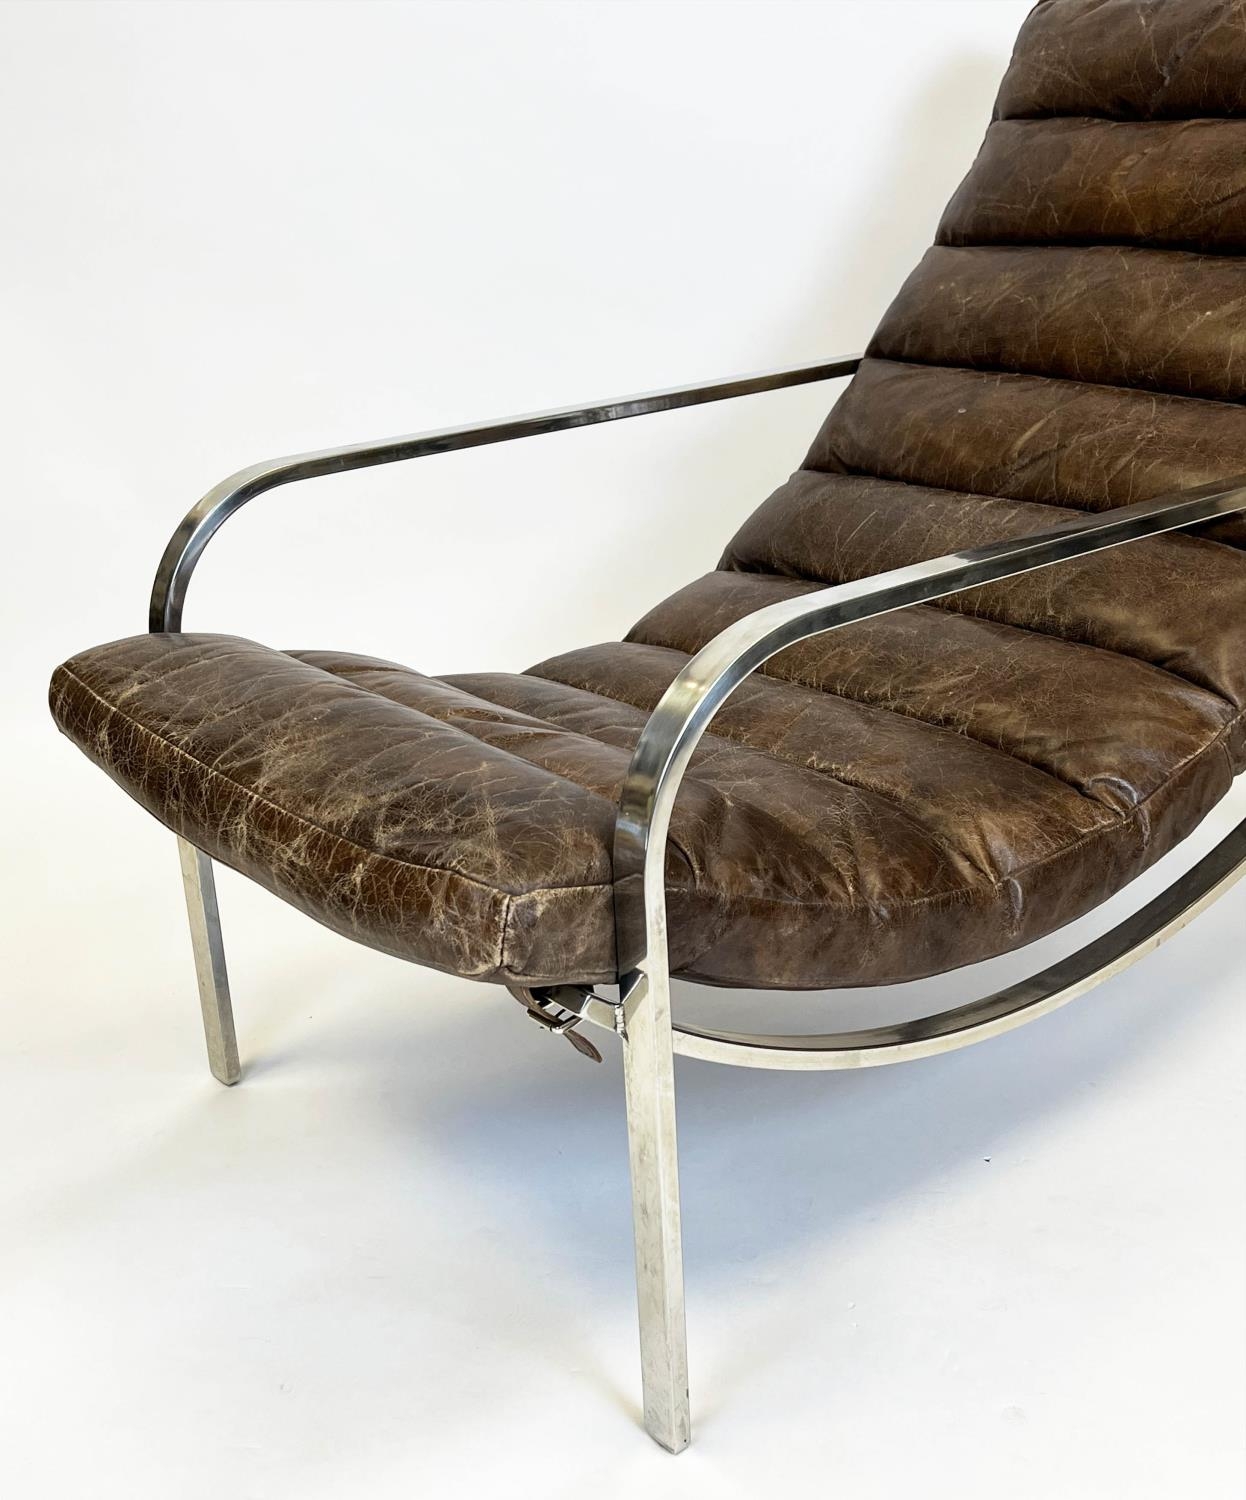 HALO SCOTT ARMCHAIR, ribbed brown leather with a stainless steel frame, 84cm H x 110cm x 63cm. - Image 4 of 4